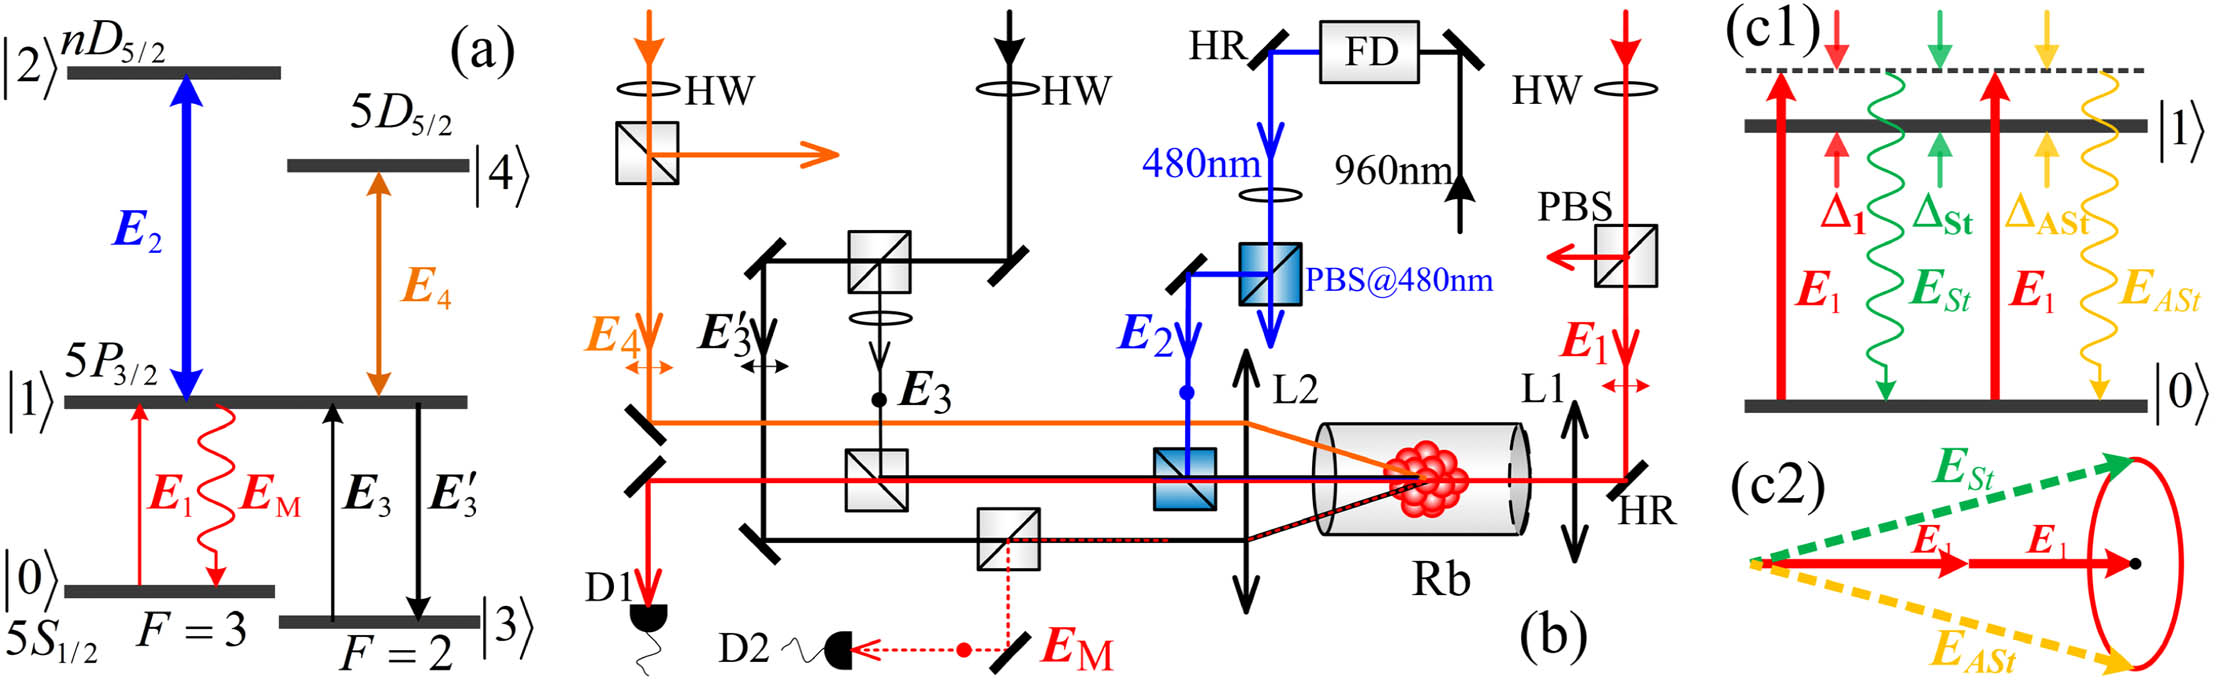 (a) Five-level K-type energy level diagram depicting the generation of the MWM process in the Rb85 atomic system. (b) Experimental setup. D, photodetector; L, lens; PBS, polarized beam splitter at corresponding wavelength; FD, frequency doubler; HR, high-reflectivity mirror; HW, half-wave plate at corresponding wavelength. Transverse double-headed arrows and filled dots indicate the horizontal polarization and vertical polarization of incident beams, respectively. Five beams derived from the four laser systems are coupled into the 10 mm long Rb cell wrapped with μ-metal sheets. The transition |0⟩↔|1⟩ is coupled by the beam E1 (780.2 nm). Rydberg transition |1⟩↔|2⟩ is coupled by beam E2 (480 nm), which counterpropagates with beam E1. |1⟩↔|3⟩ is connected by beams E3 and E3′ (780.2 nm), which are derived from the same ECDL, and |1⟩↔|4⟩ is coupled by beam E4 (775.9 nm). The EIT signal and MWM spectrum signals are received by D1 and D2, respectively. (c1) Energy schematic diagram for SP-FWM process; (c2) phase-matching condition of SP-FWM process.